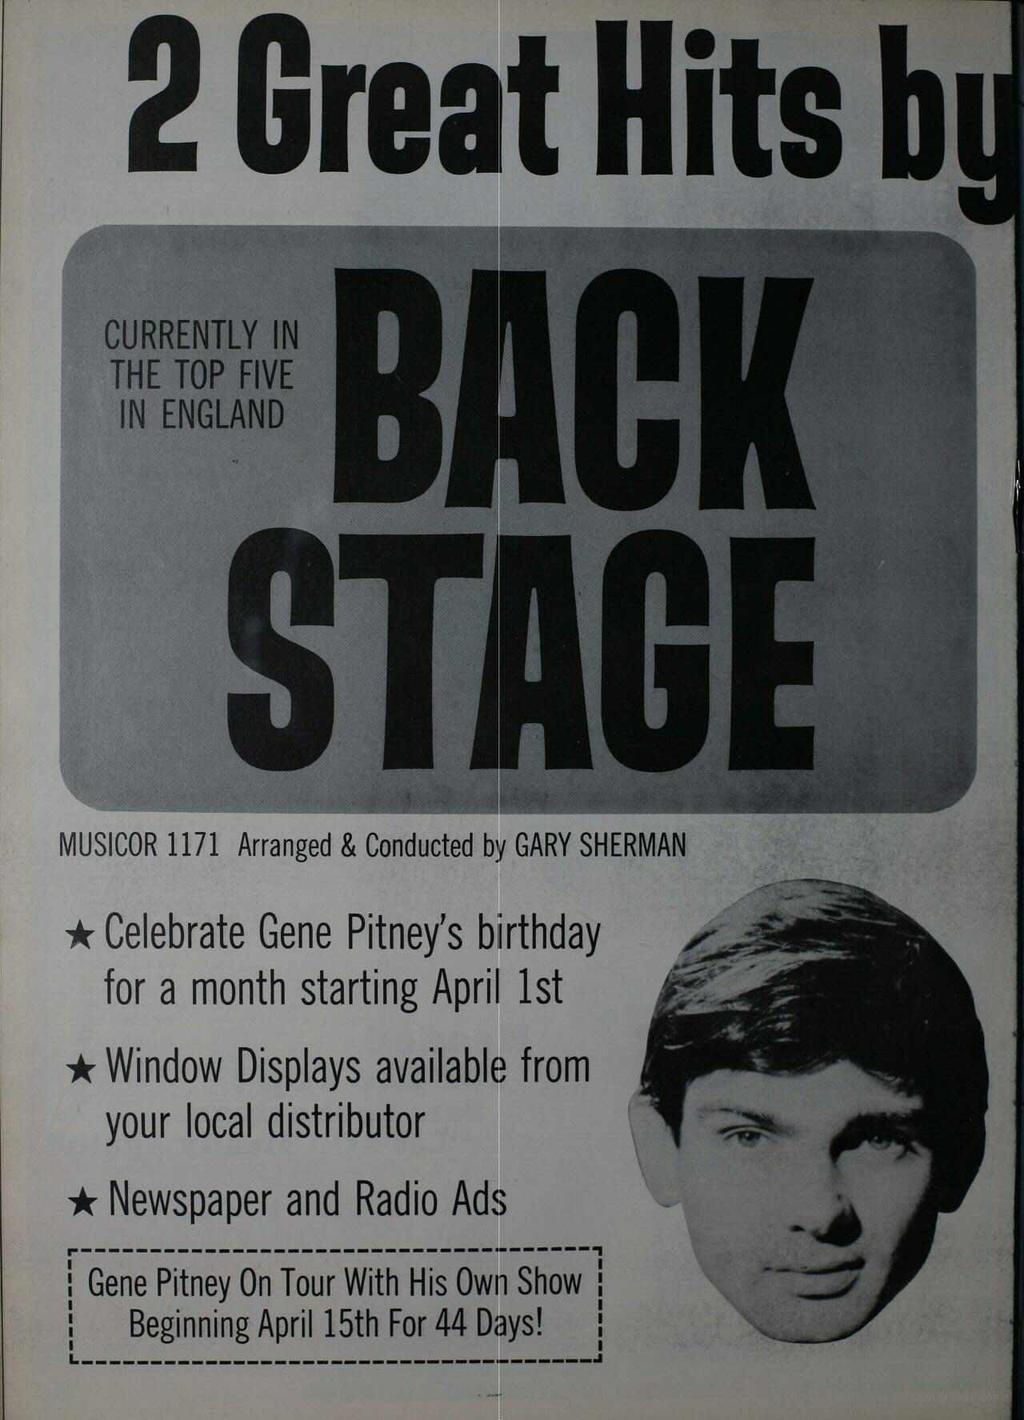 2 Grea t Hits b CURRENTLY IN THE TOP FIVE IN ENGLAND AC STAG MUSICOR 1171 Arranged & Conducted by GARY SHERMAN * Celebrate Gene Pitney's birthday for a month